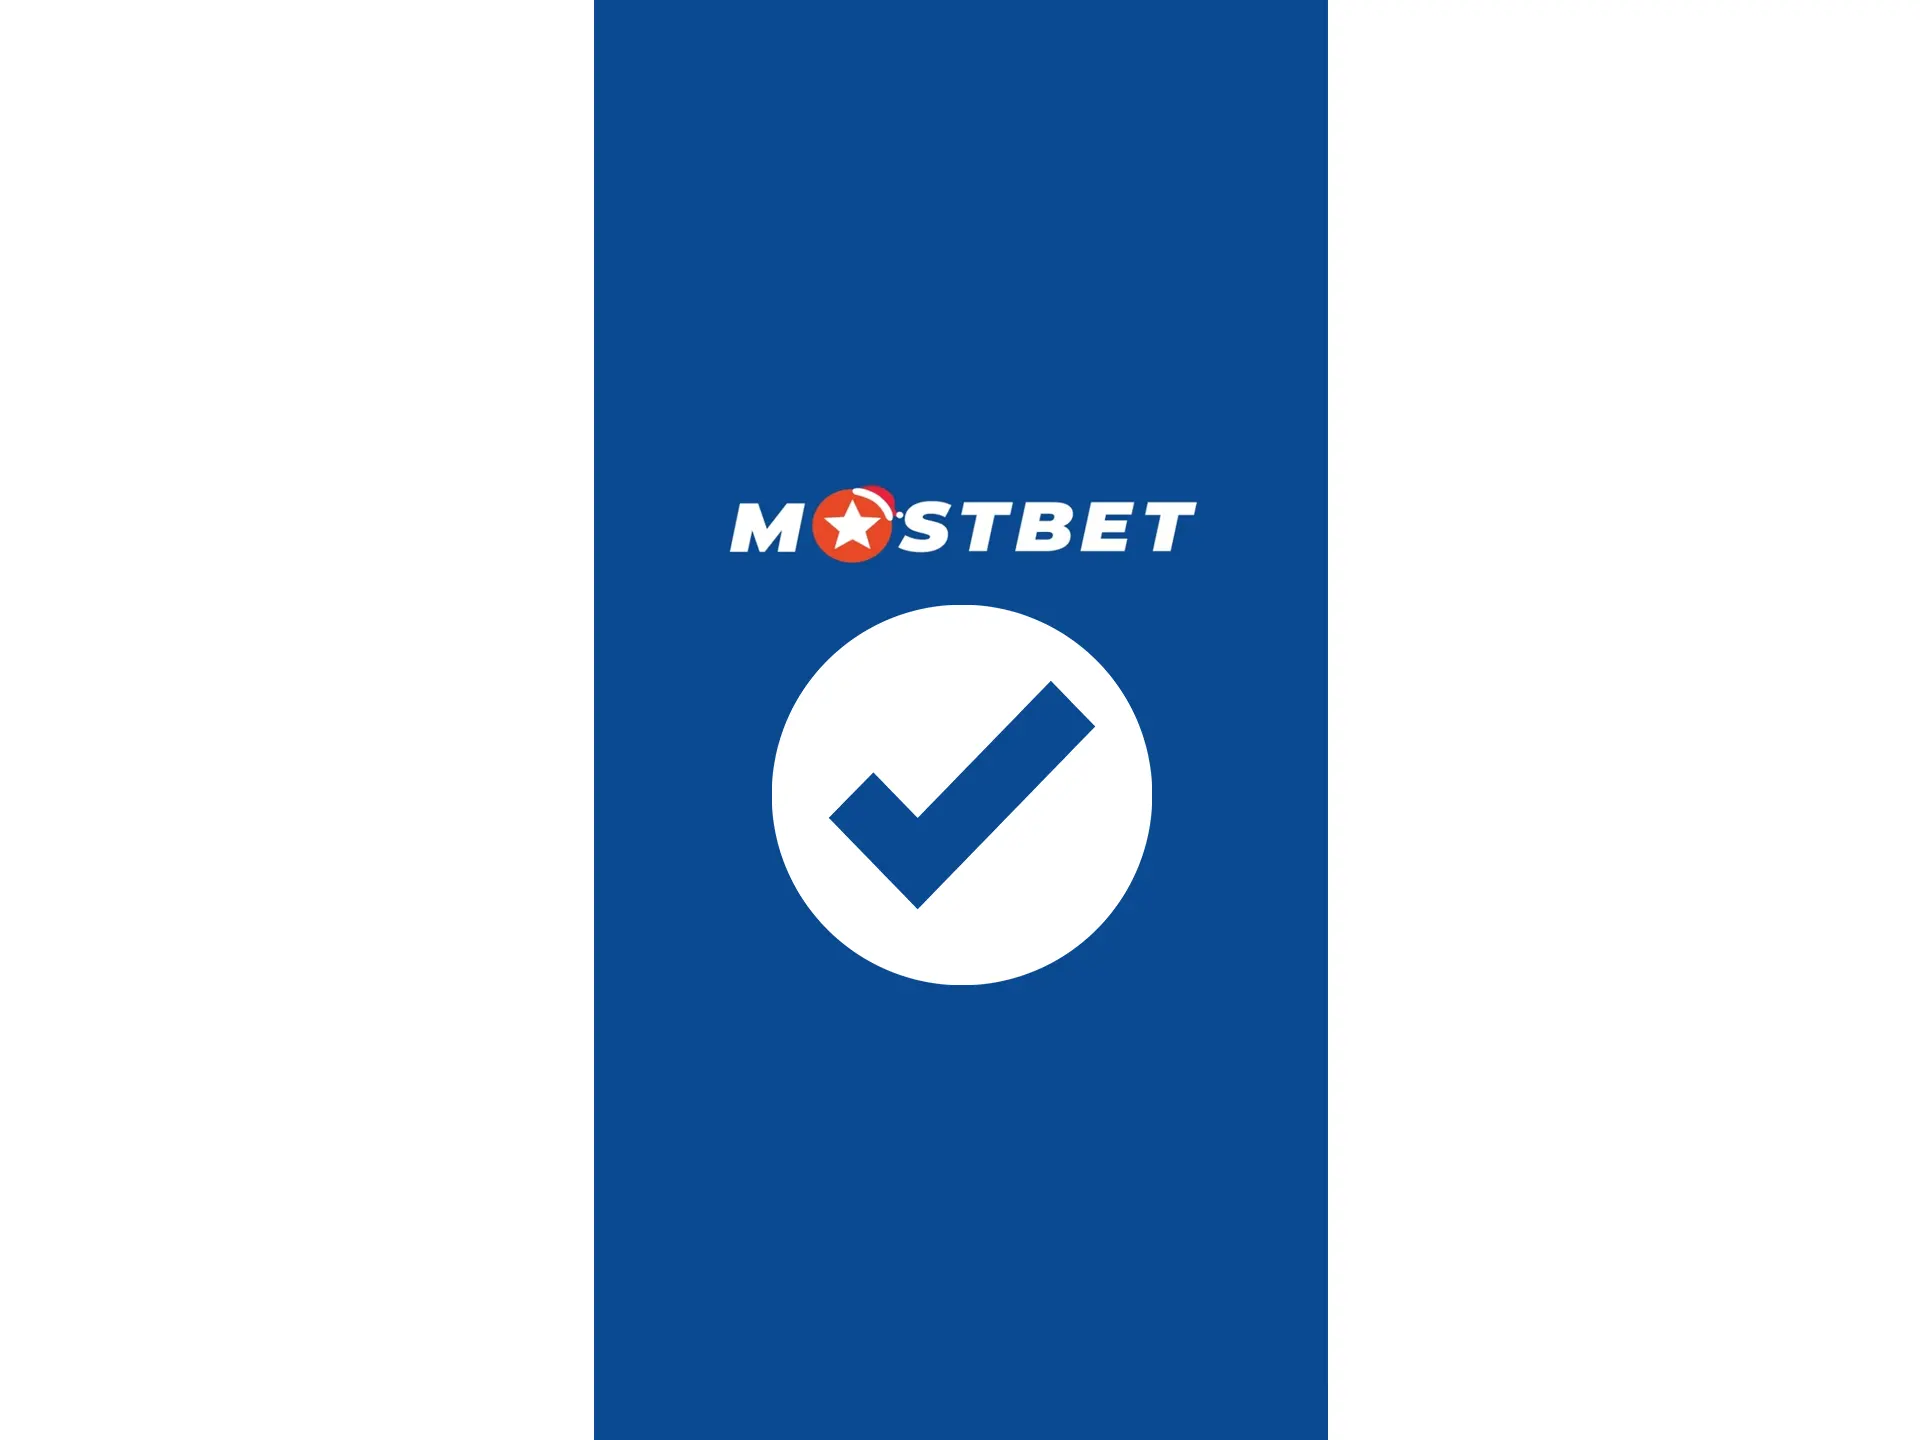 Why Mostbet Betting Company and Casino in Egypt Doesn't Work…For Everyone